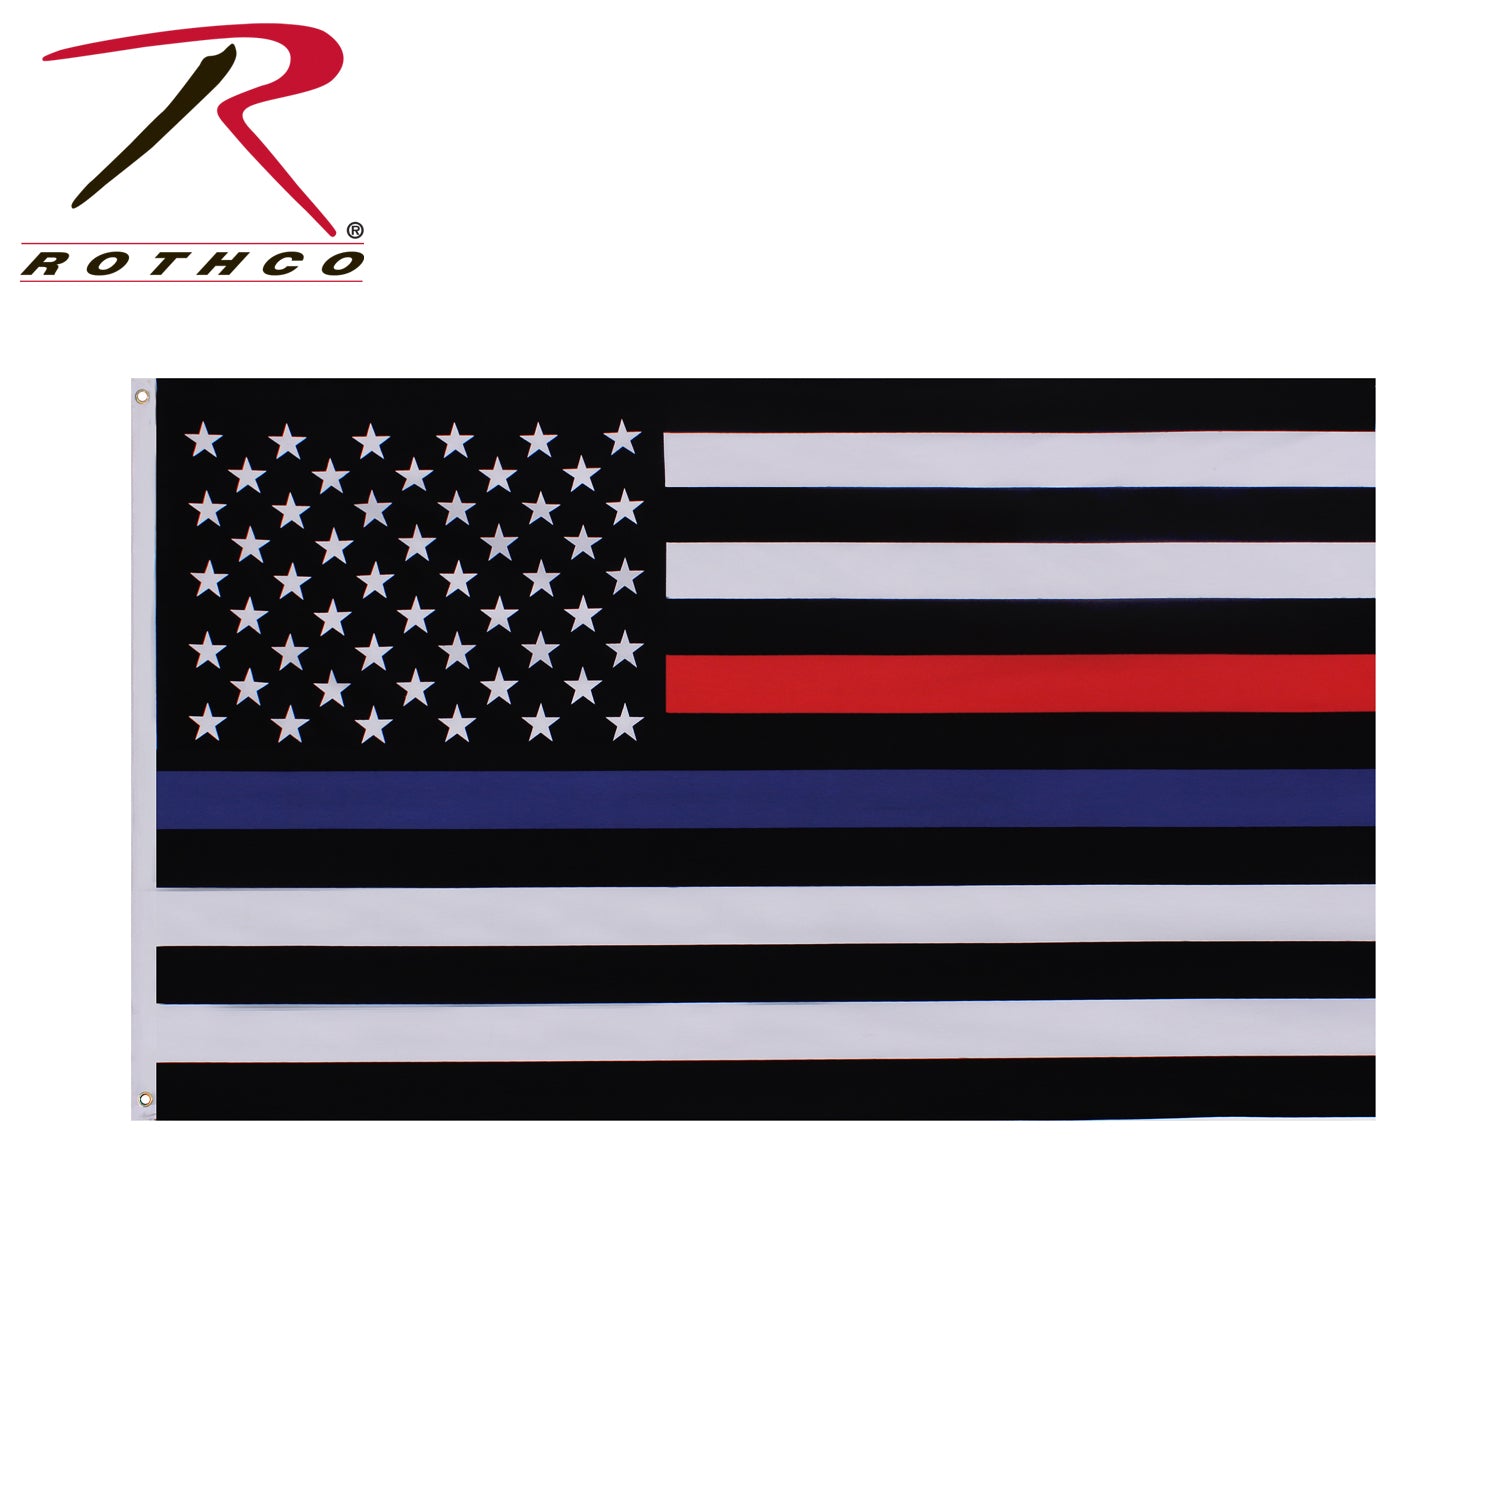 Rothco Thin Blue and Thin Red Line Flag 3x5